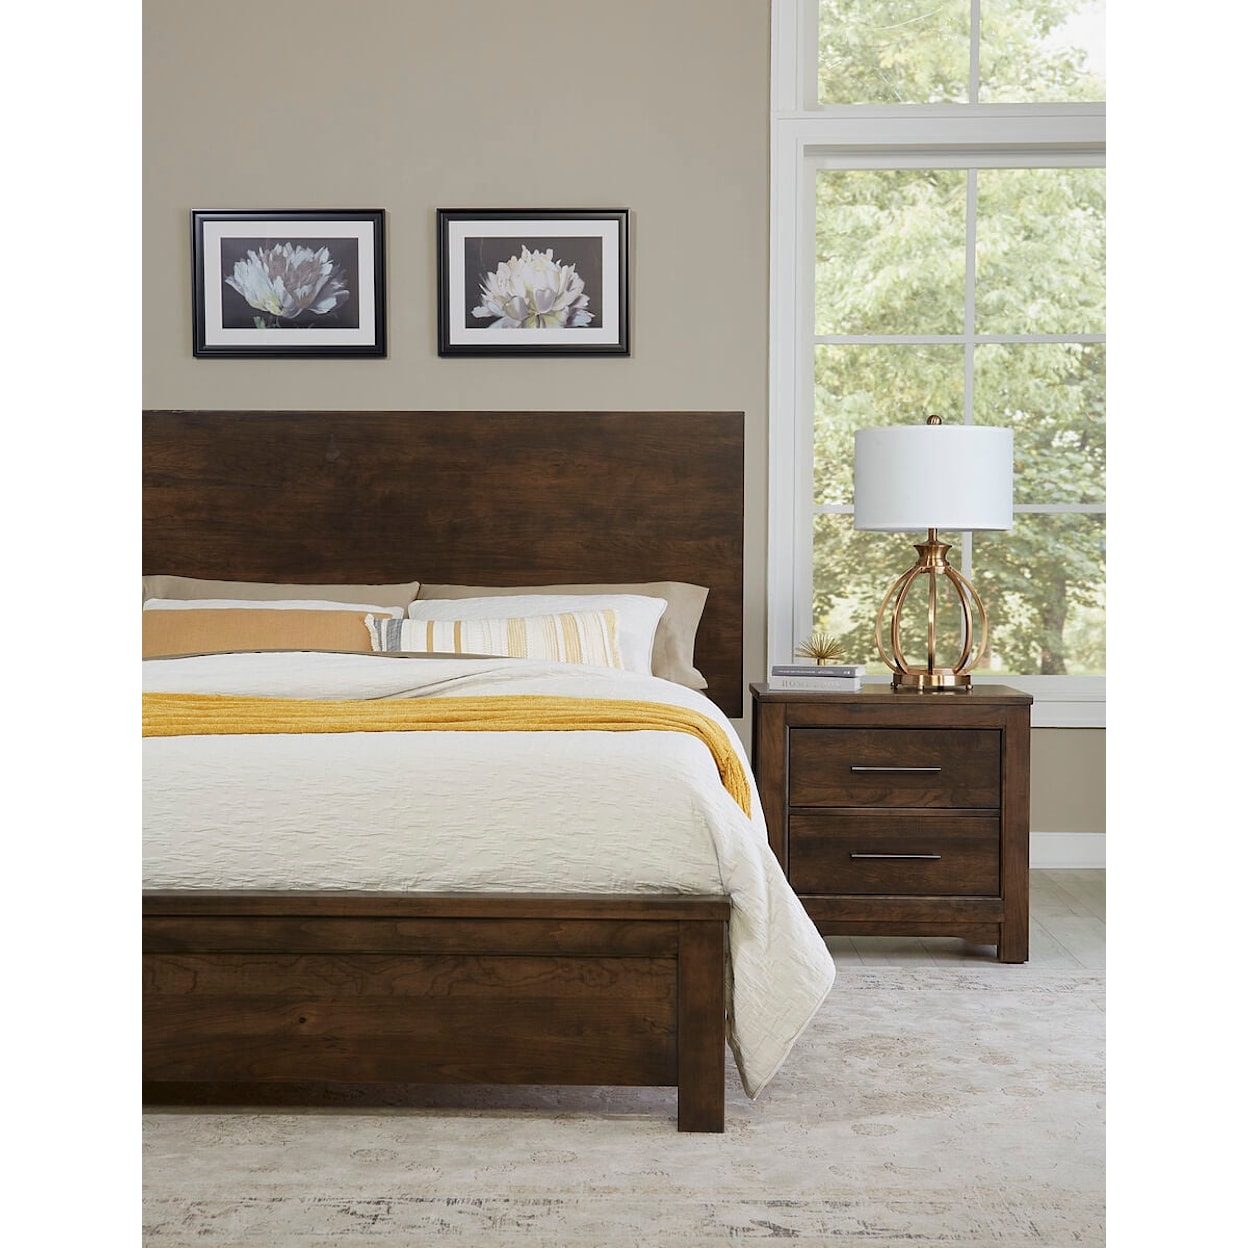 Artisan & Post Crafted Cherry Queen Plank Bed